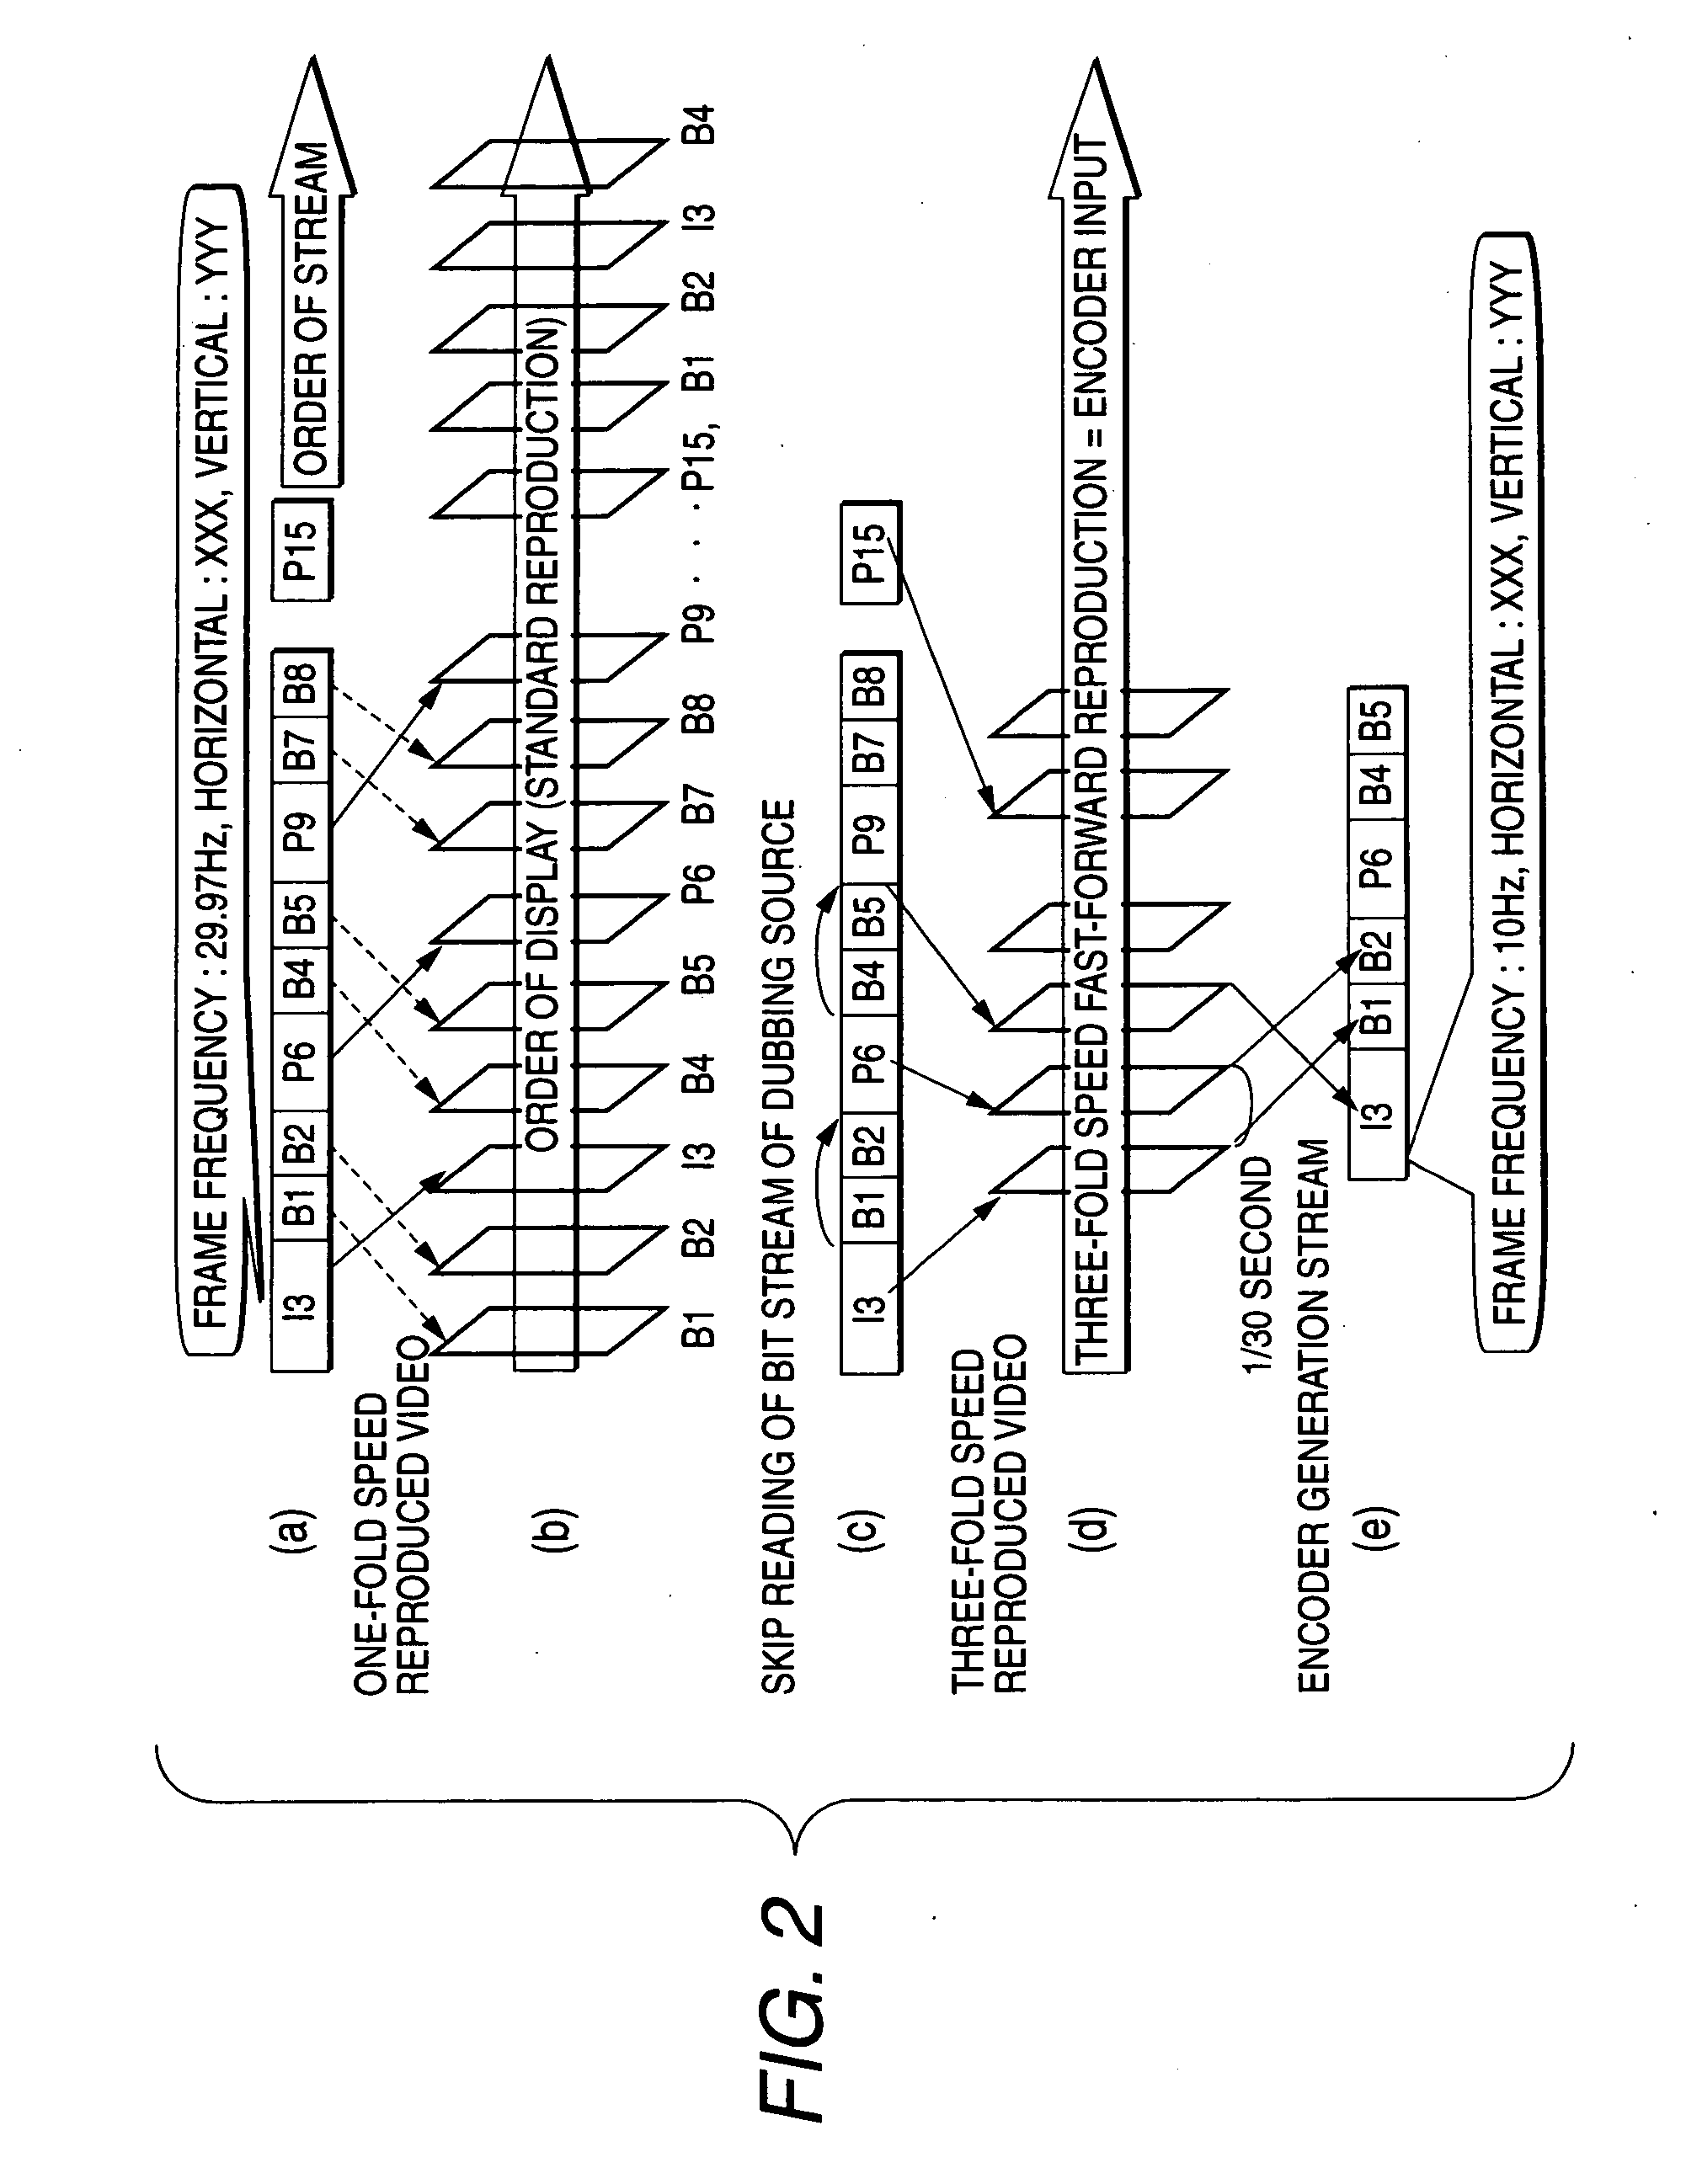 Encoded video conversion apparatus, conversion method and program product